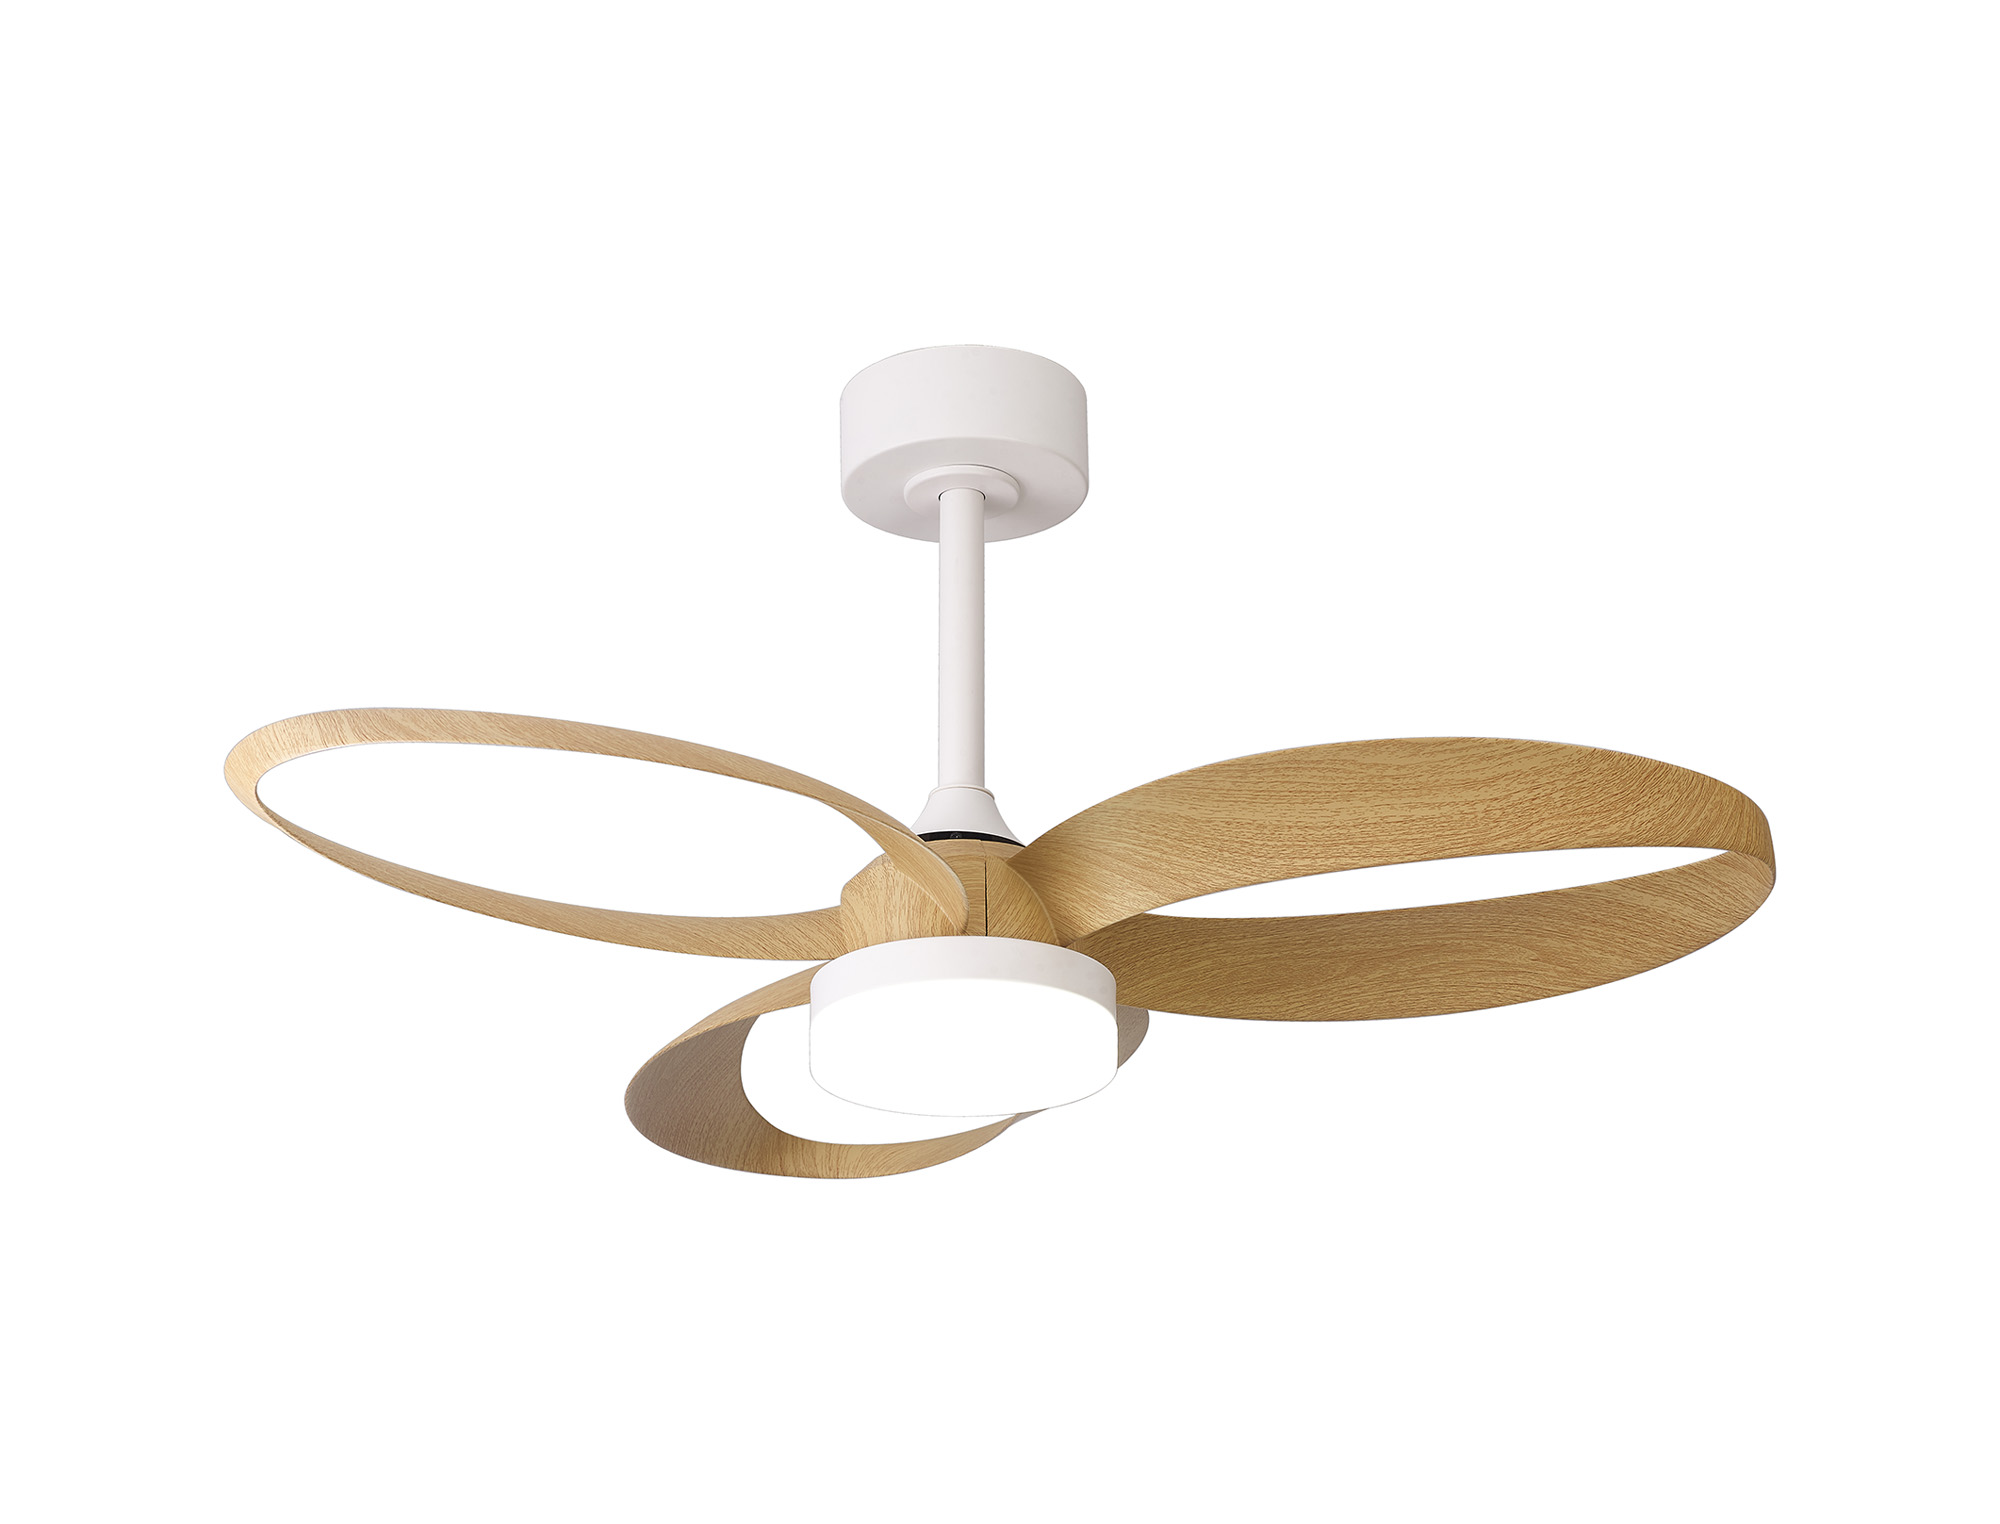 M8702  Infinity Fan 24W LED Dimmable Ceiling Light & Fan, Remote Controlled, White/Wood